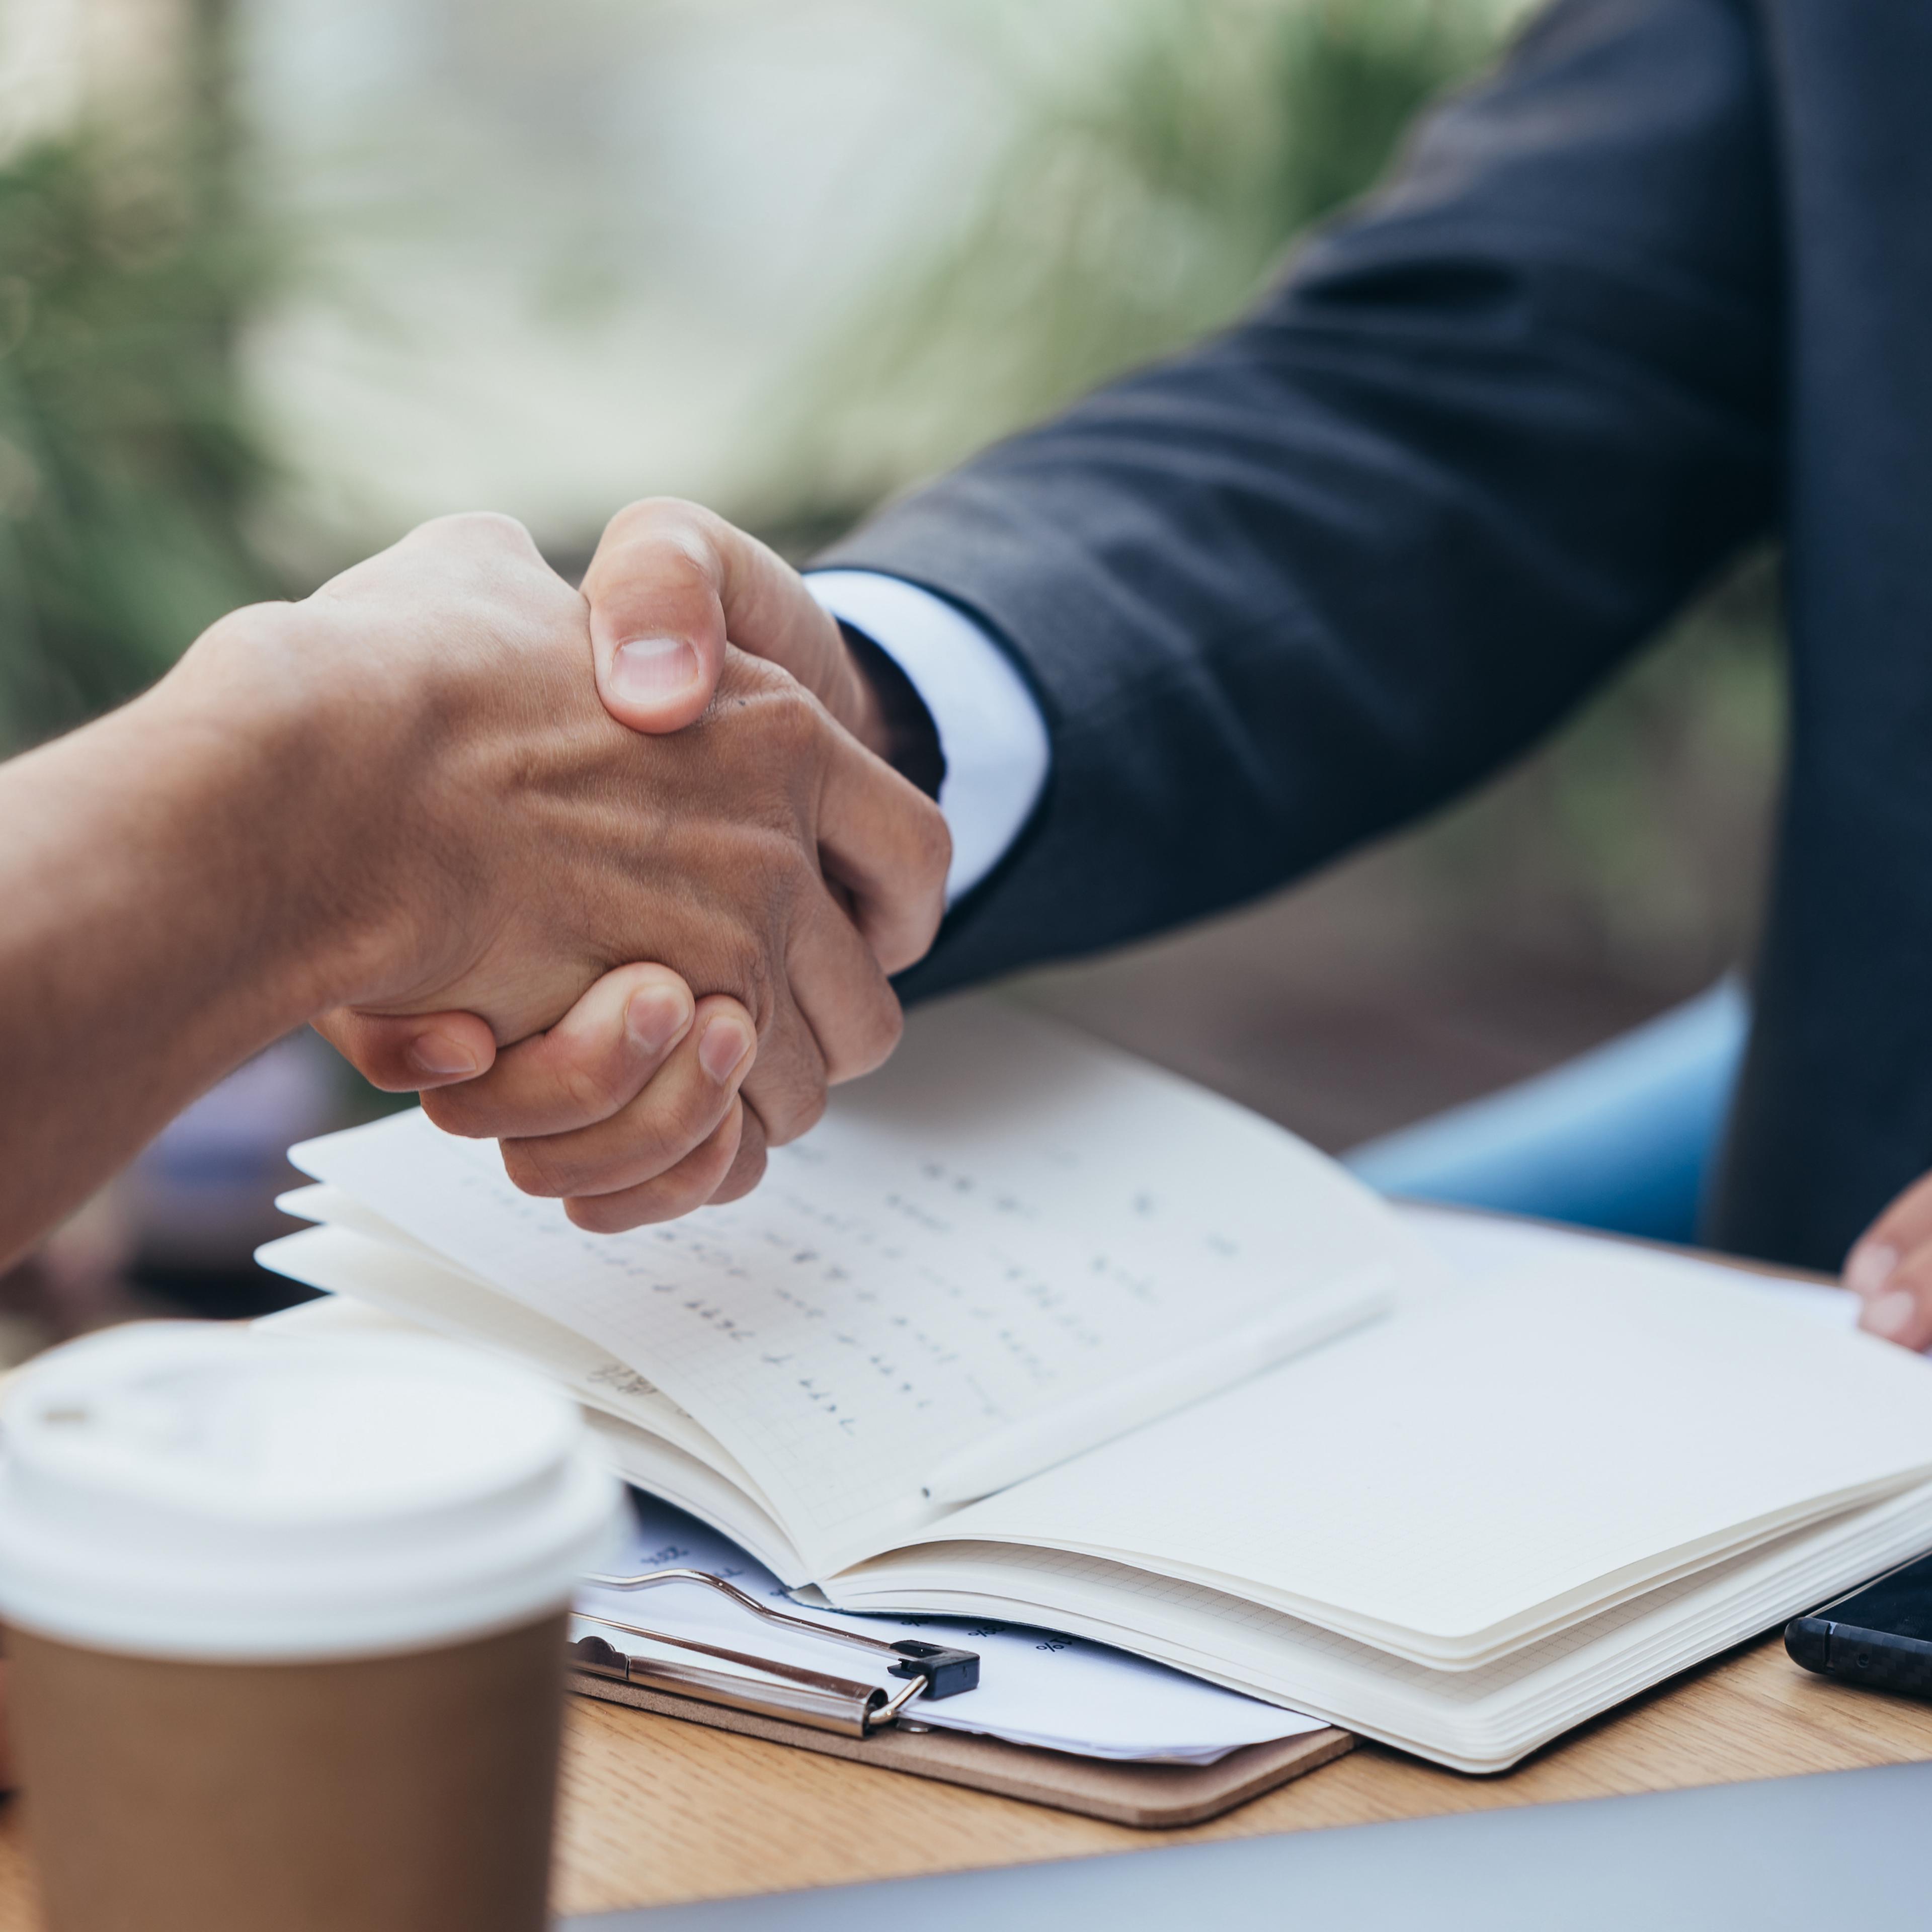 Two people shaking hands during a meeting